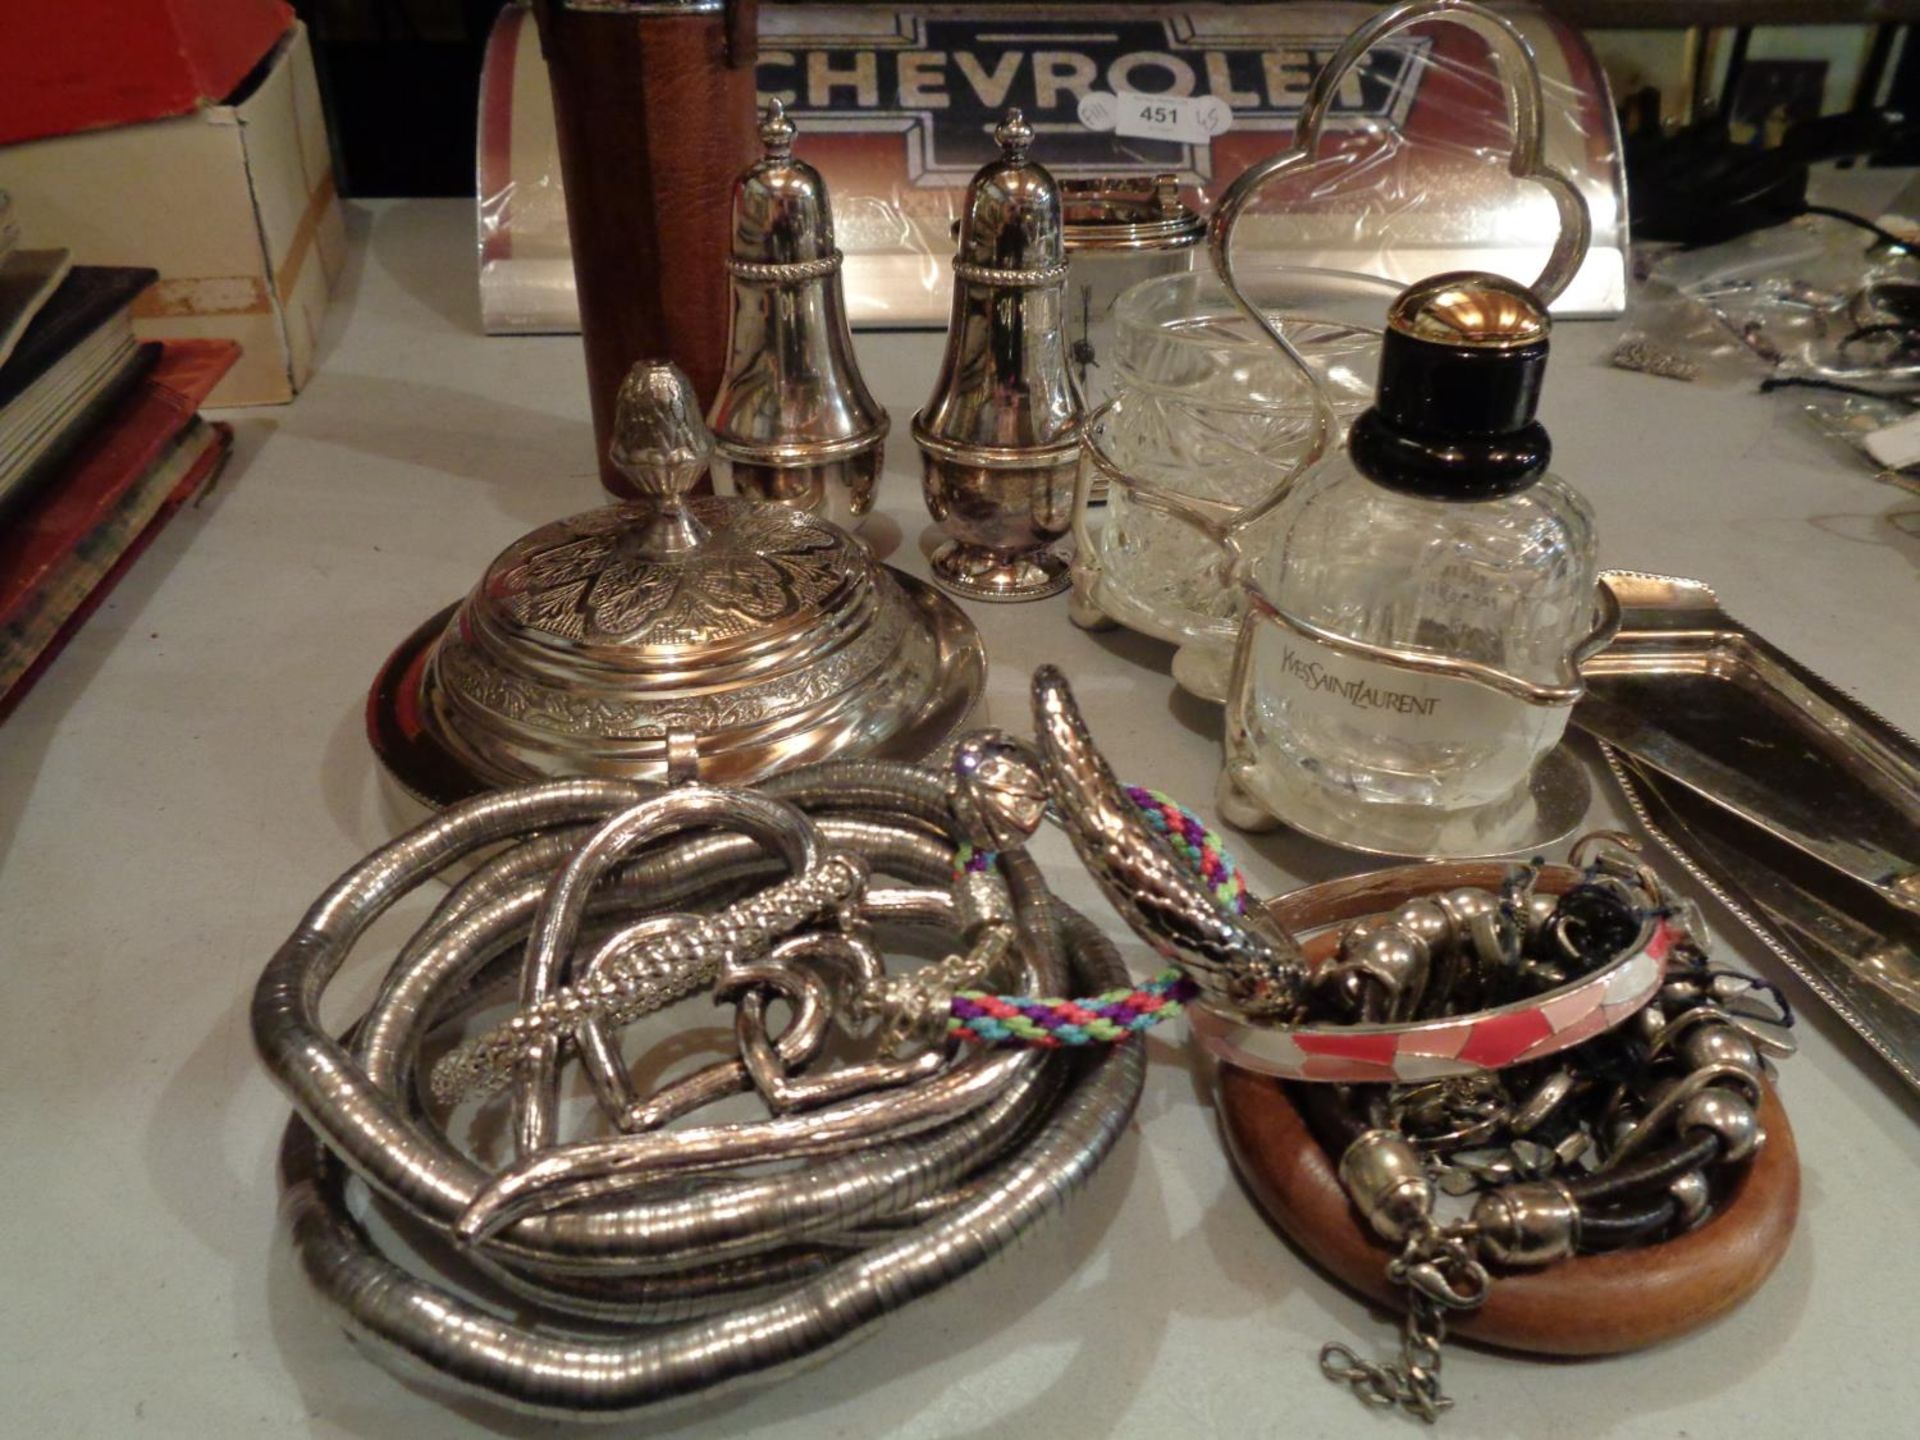 A NUMBER OF SILVER PLATED ITEMS TO INCLUDE A SALT AND PEPPER SHAKER AND ALSO SOME COSTUME JEWELLERY - Image 2 of 4